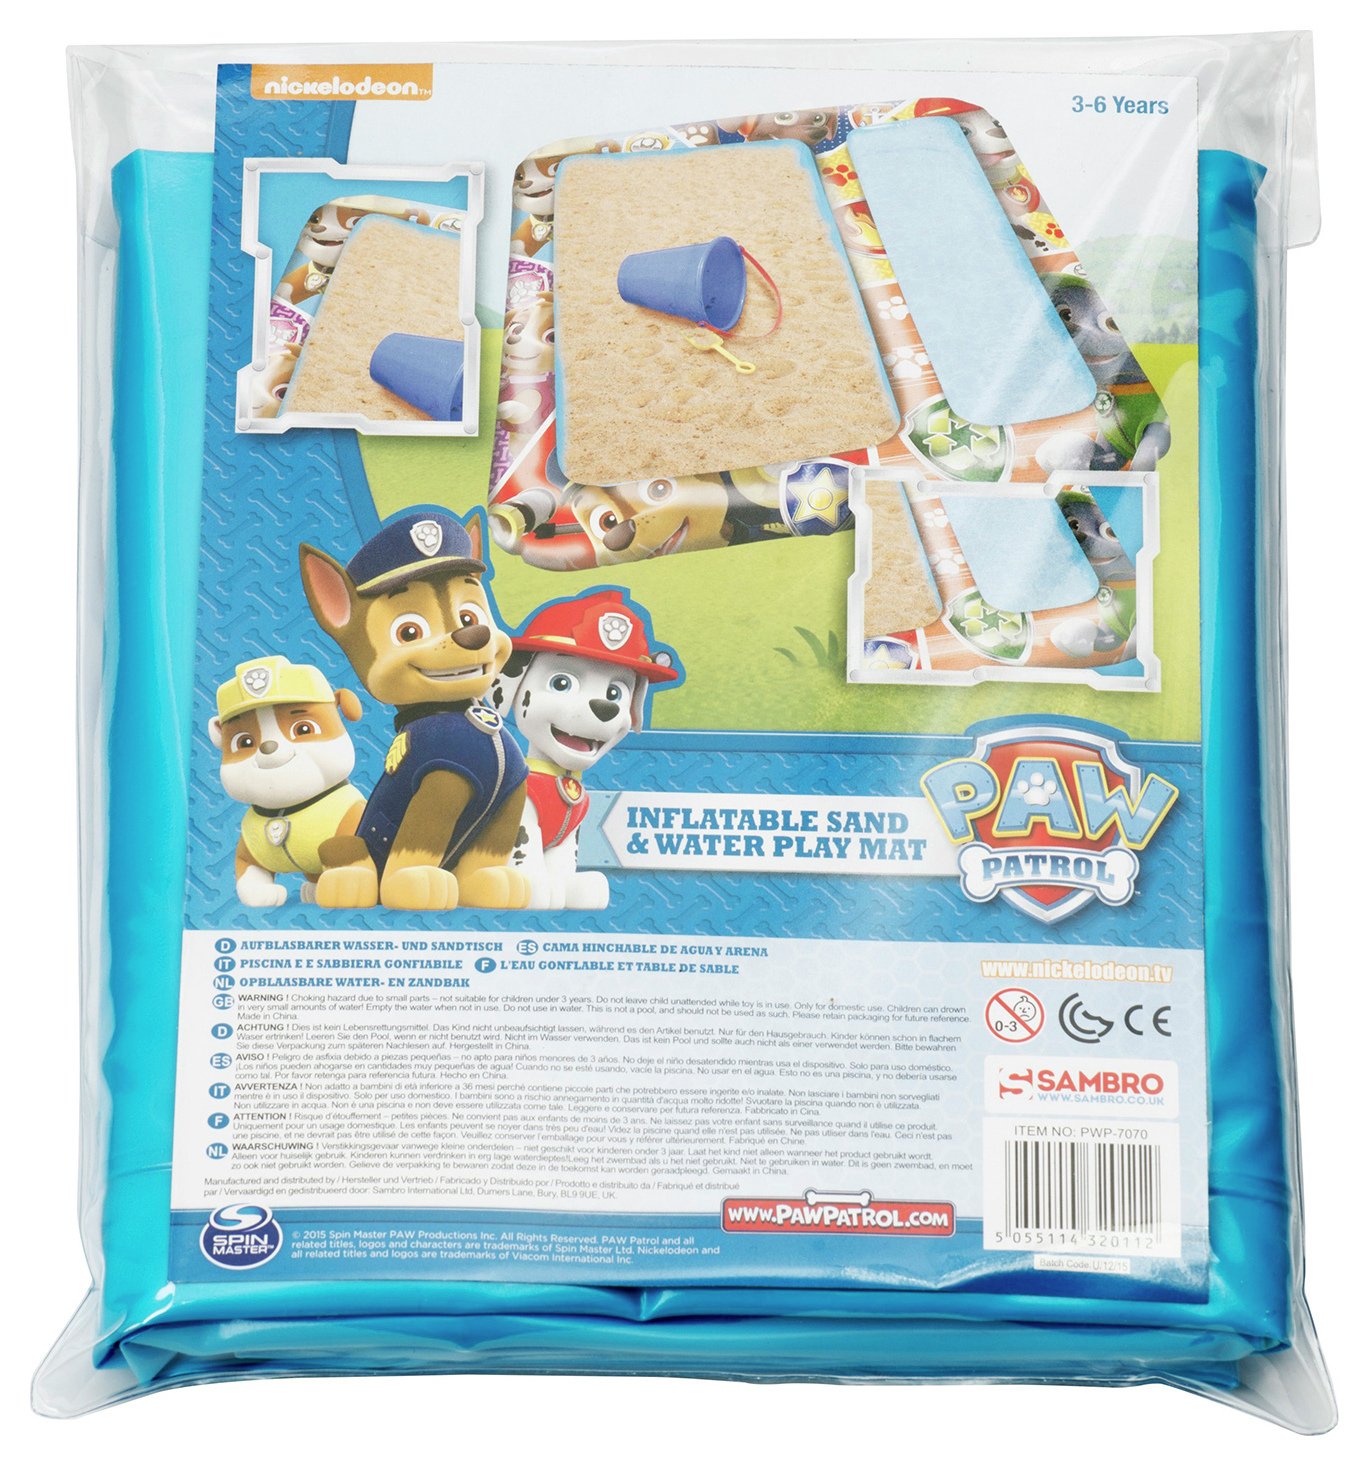 Paw Patrol Inflatable Sand Water Play Mat